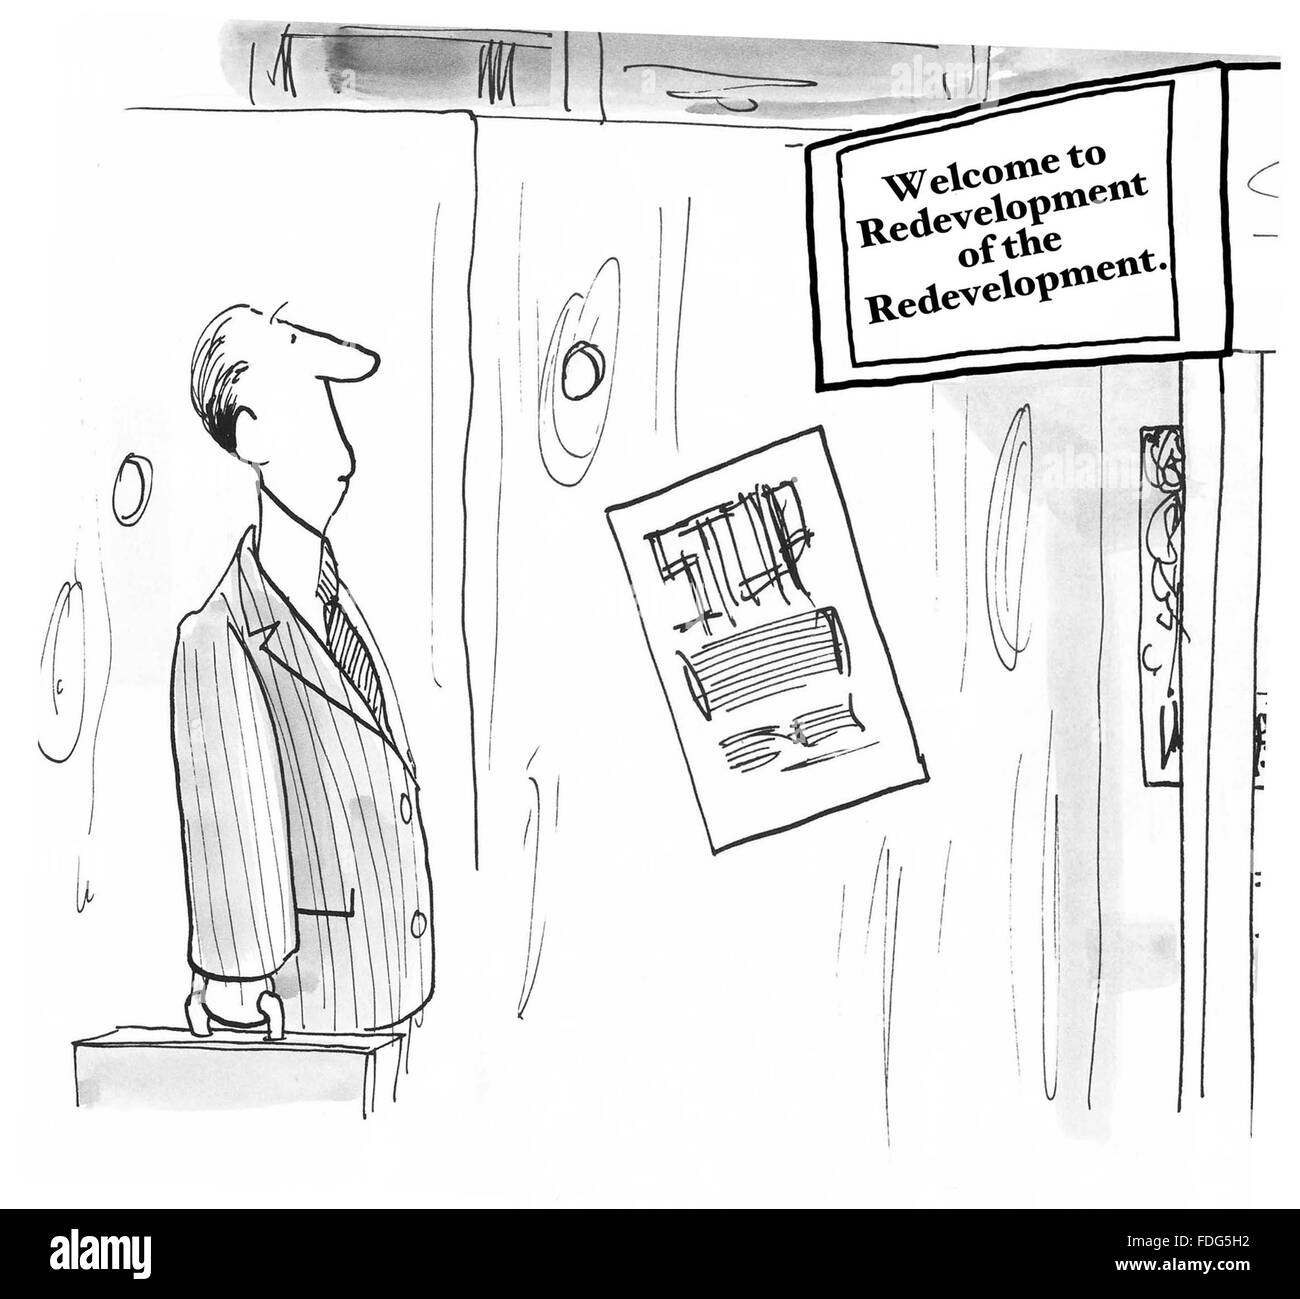 Cartoon about city planning. Redeveloping the redevelopment Stock Photo -  Alamy